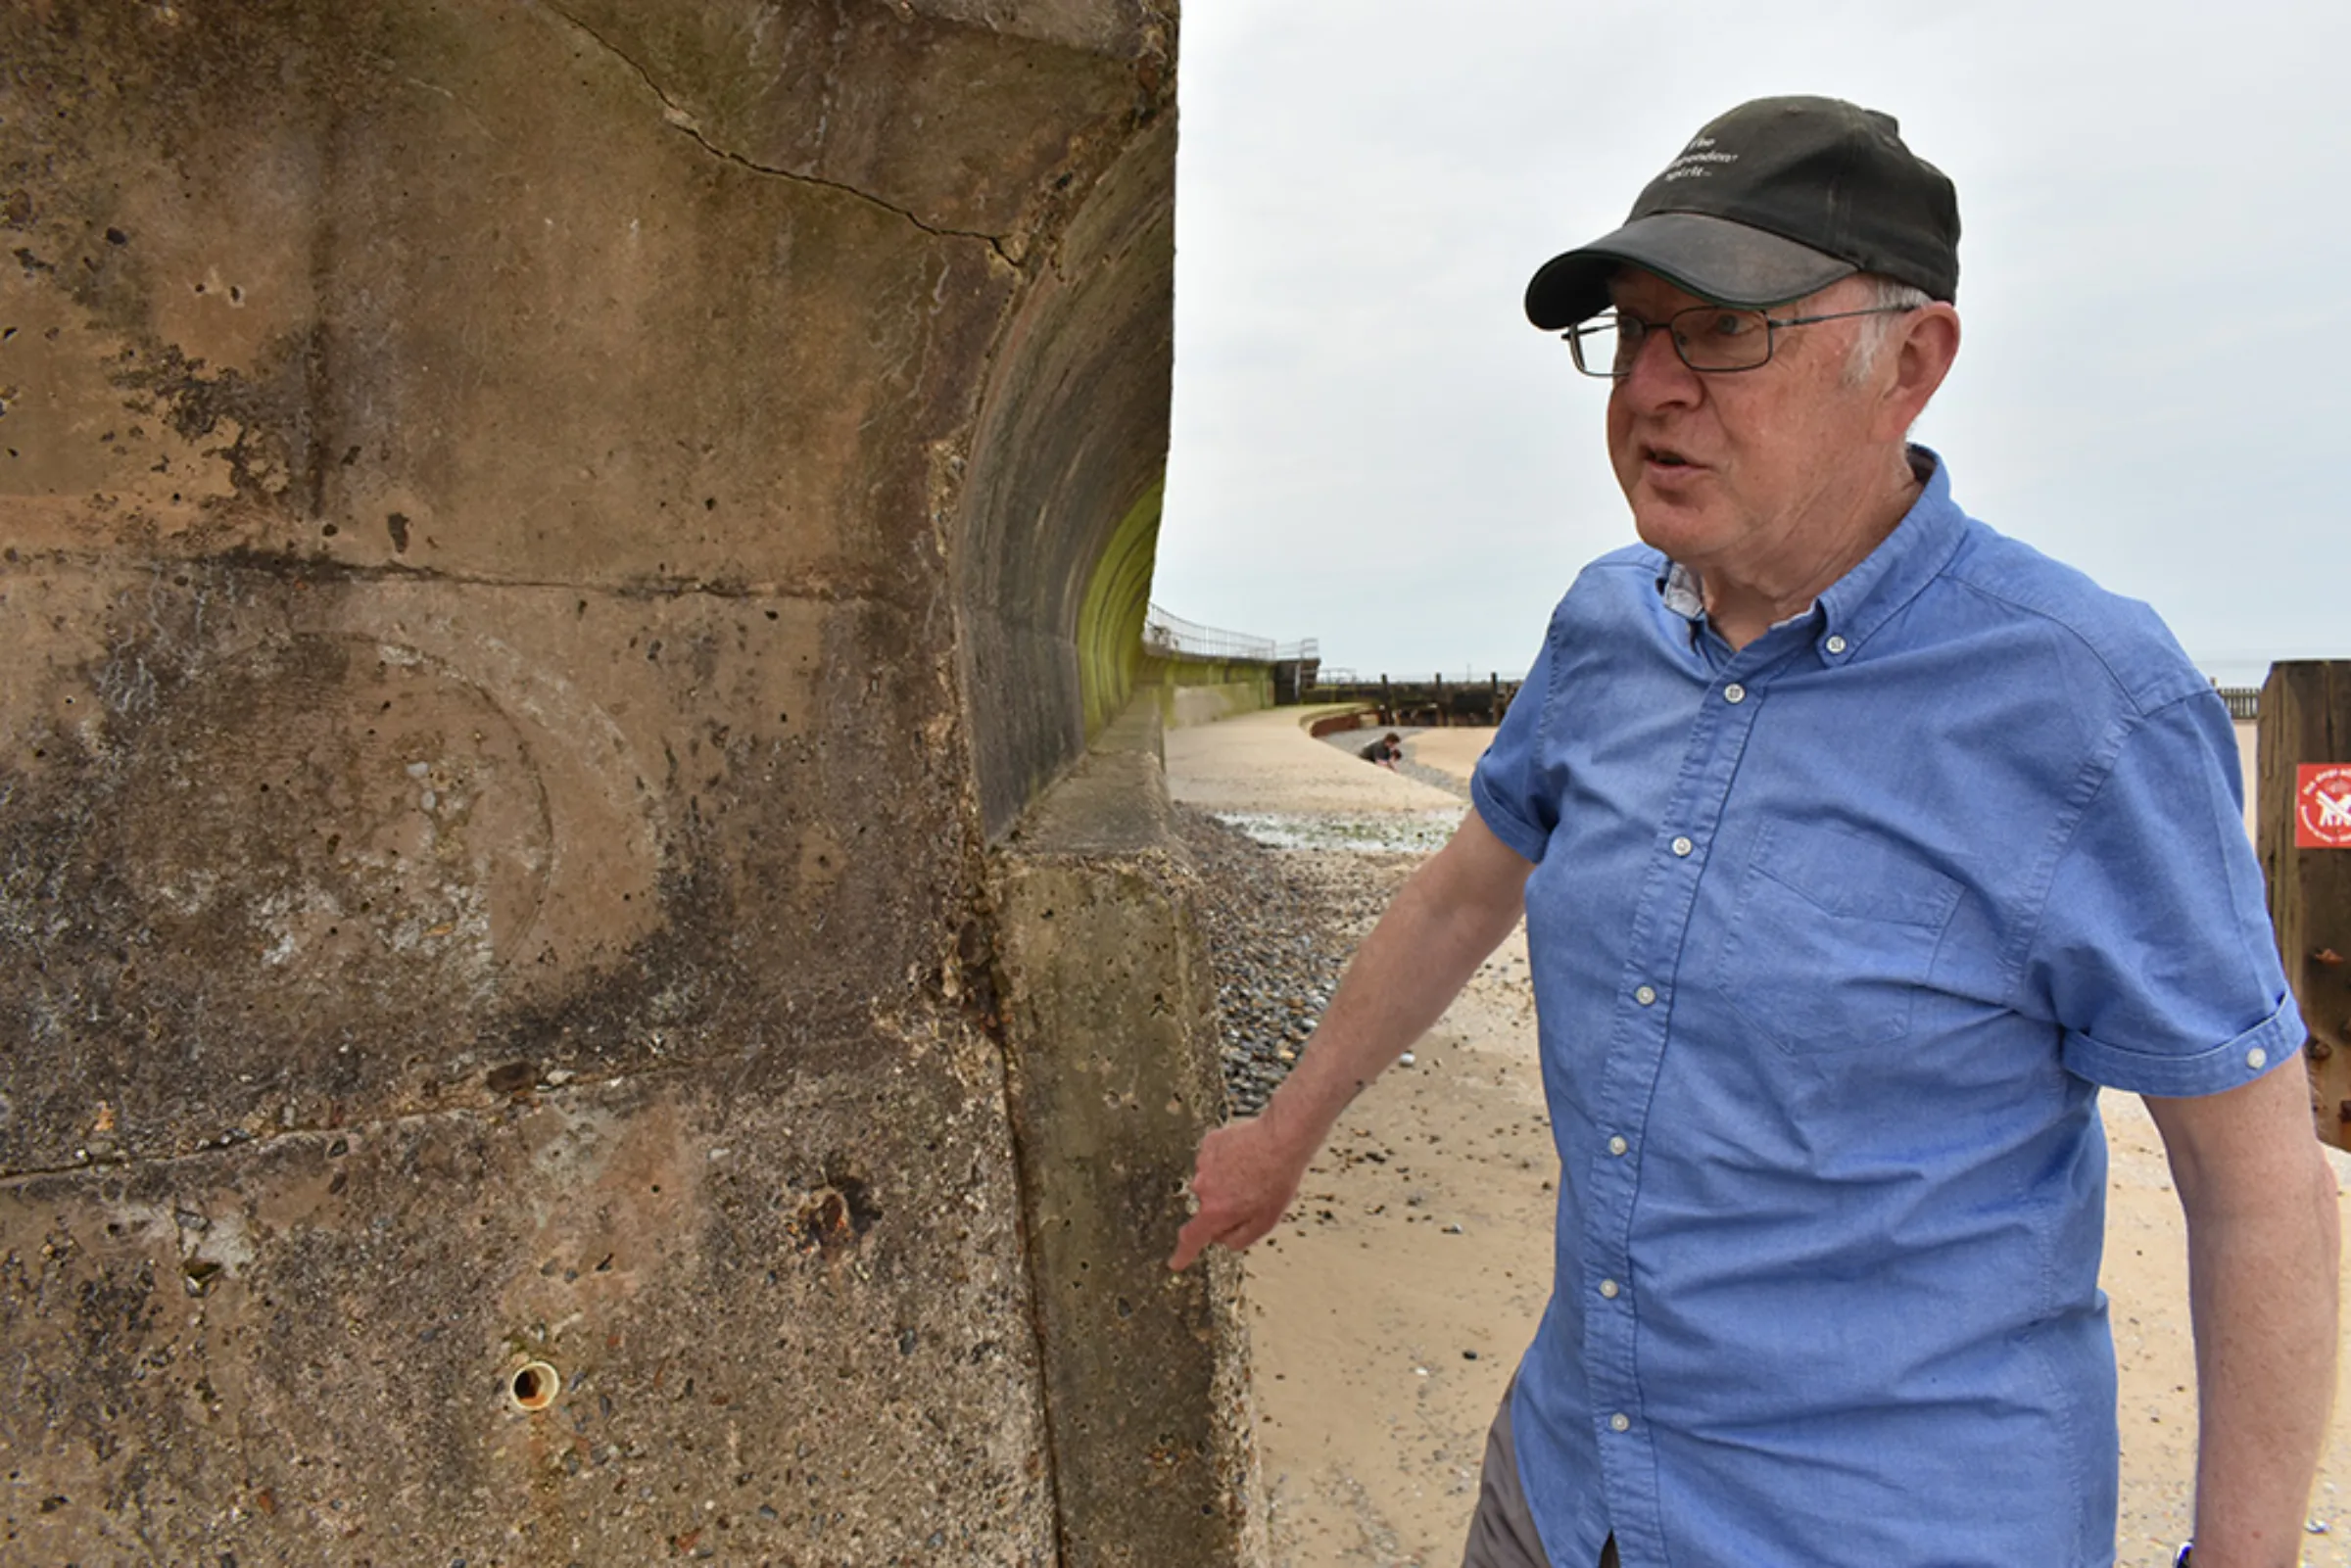 Longtime Overstrand resident Gordon Partridge points out repairs and reinforcement to the old sea wall made over the years in the small Norfolk village in England, June 17, 2023. Thomson Reuters Foundation/Rachel Parsons